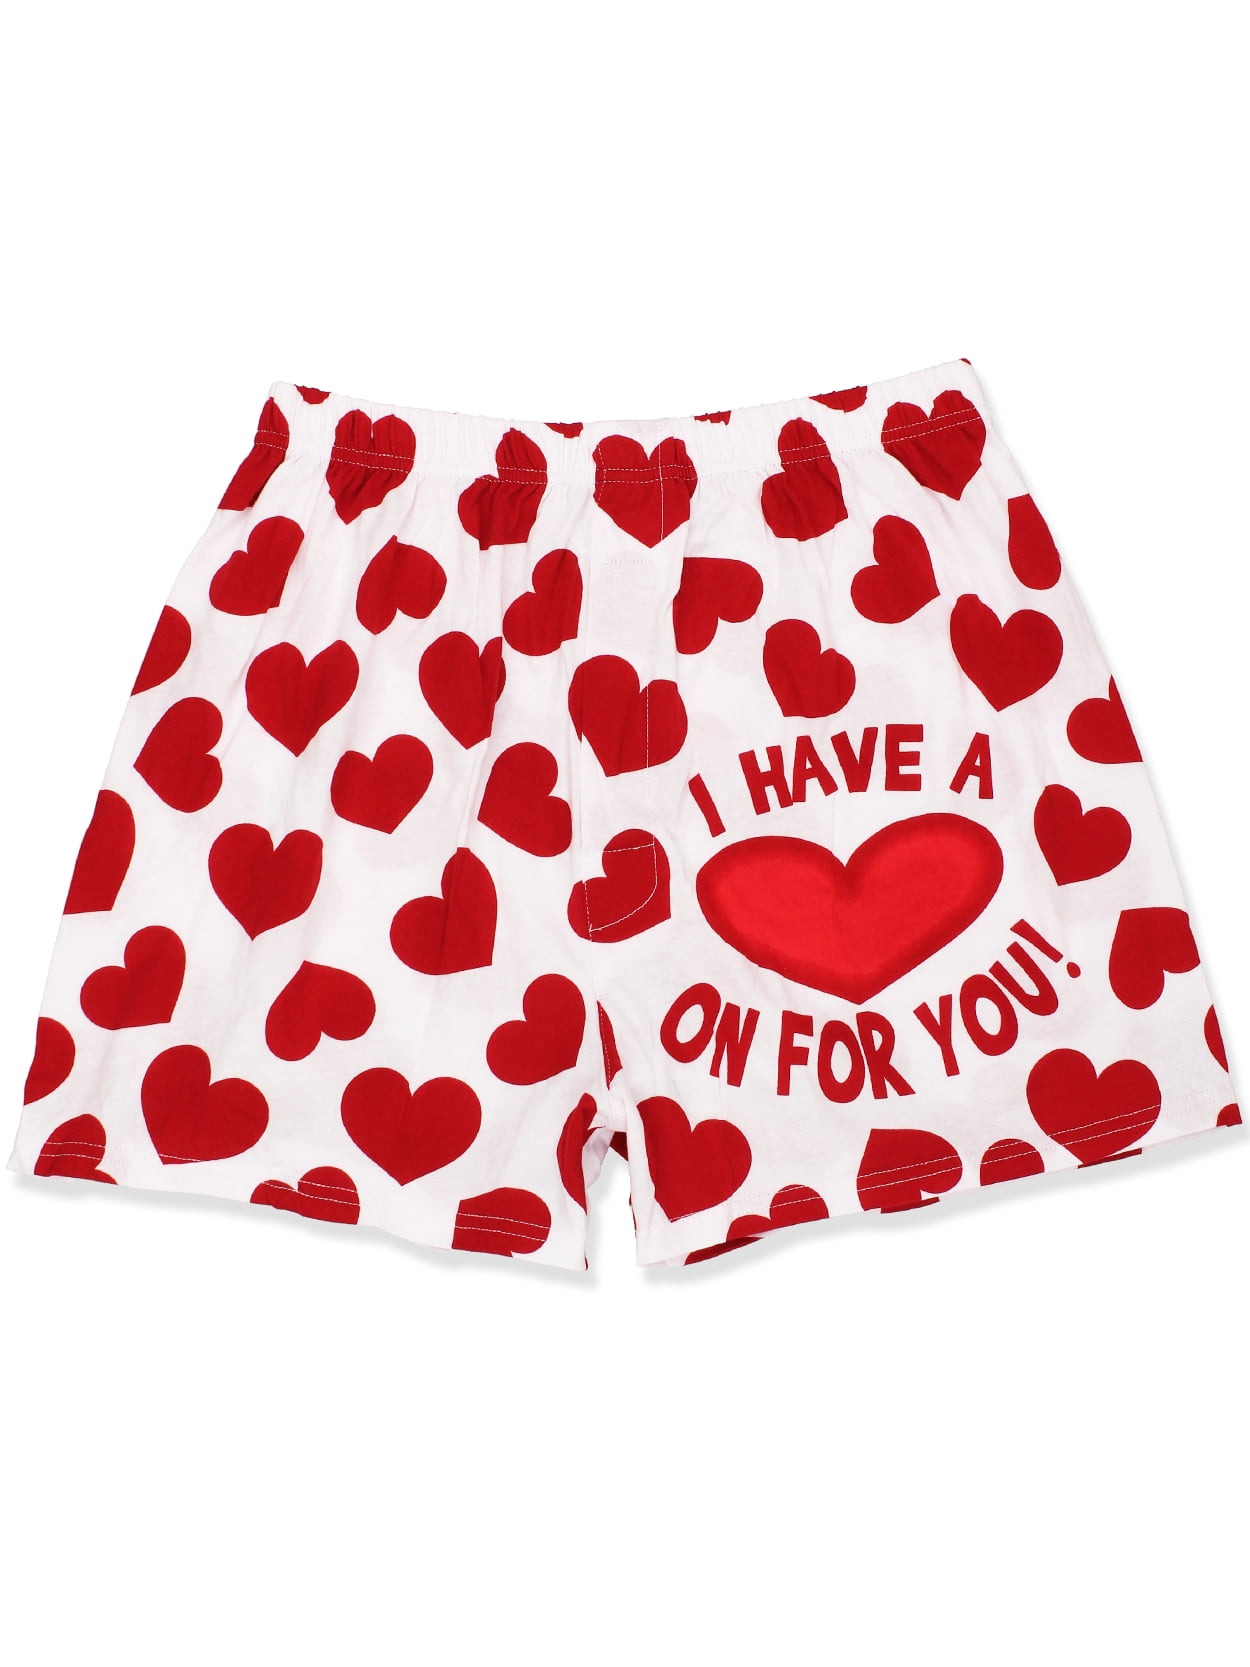 Briefly Stated 'I Have a Heart on for You' Men's Boxer Shorts Underwear  GE614MBX 